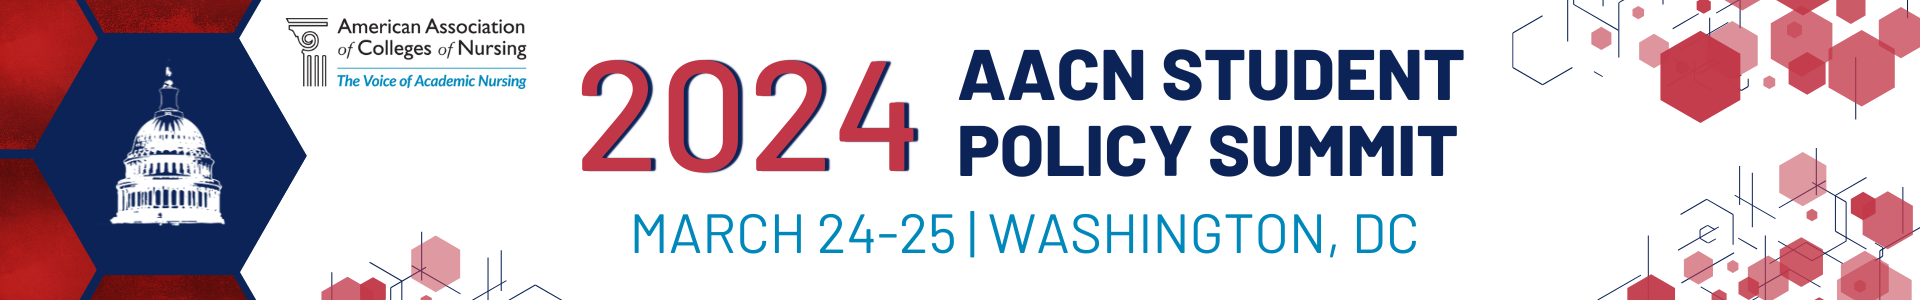 American association of colleges of nursing | 2023 AACN Student Policy Summit | March 26-27, 2023 | Washington, DC